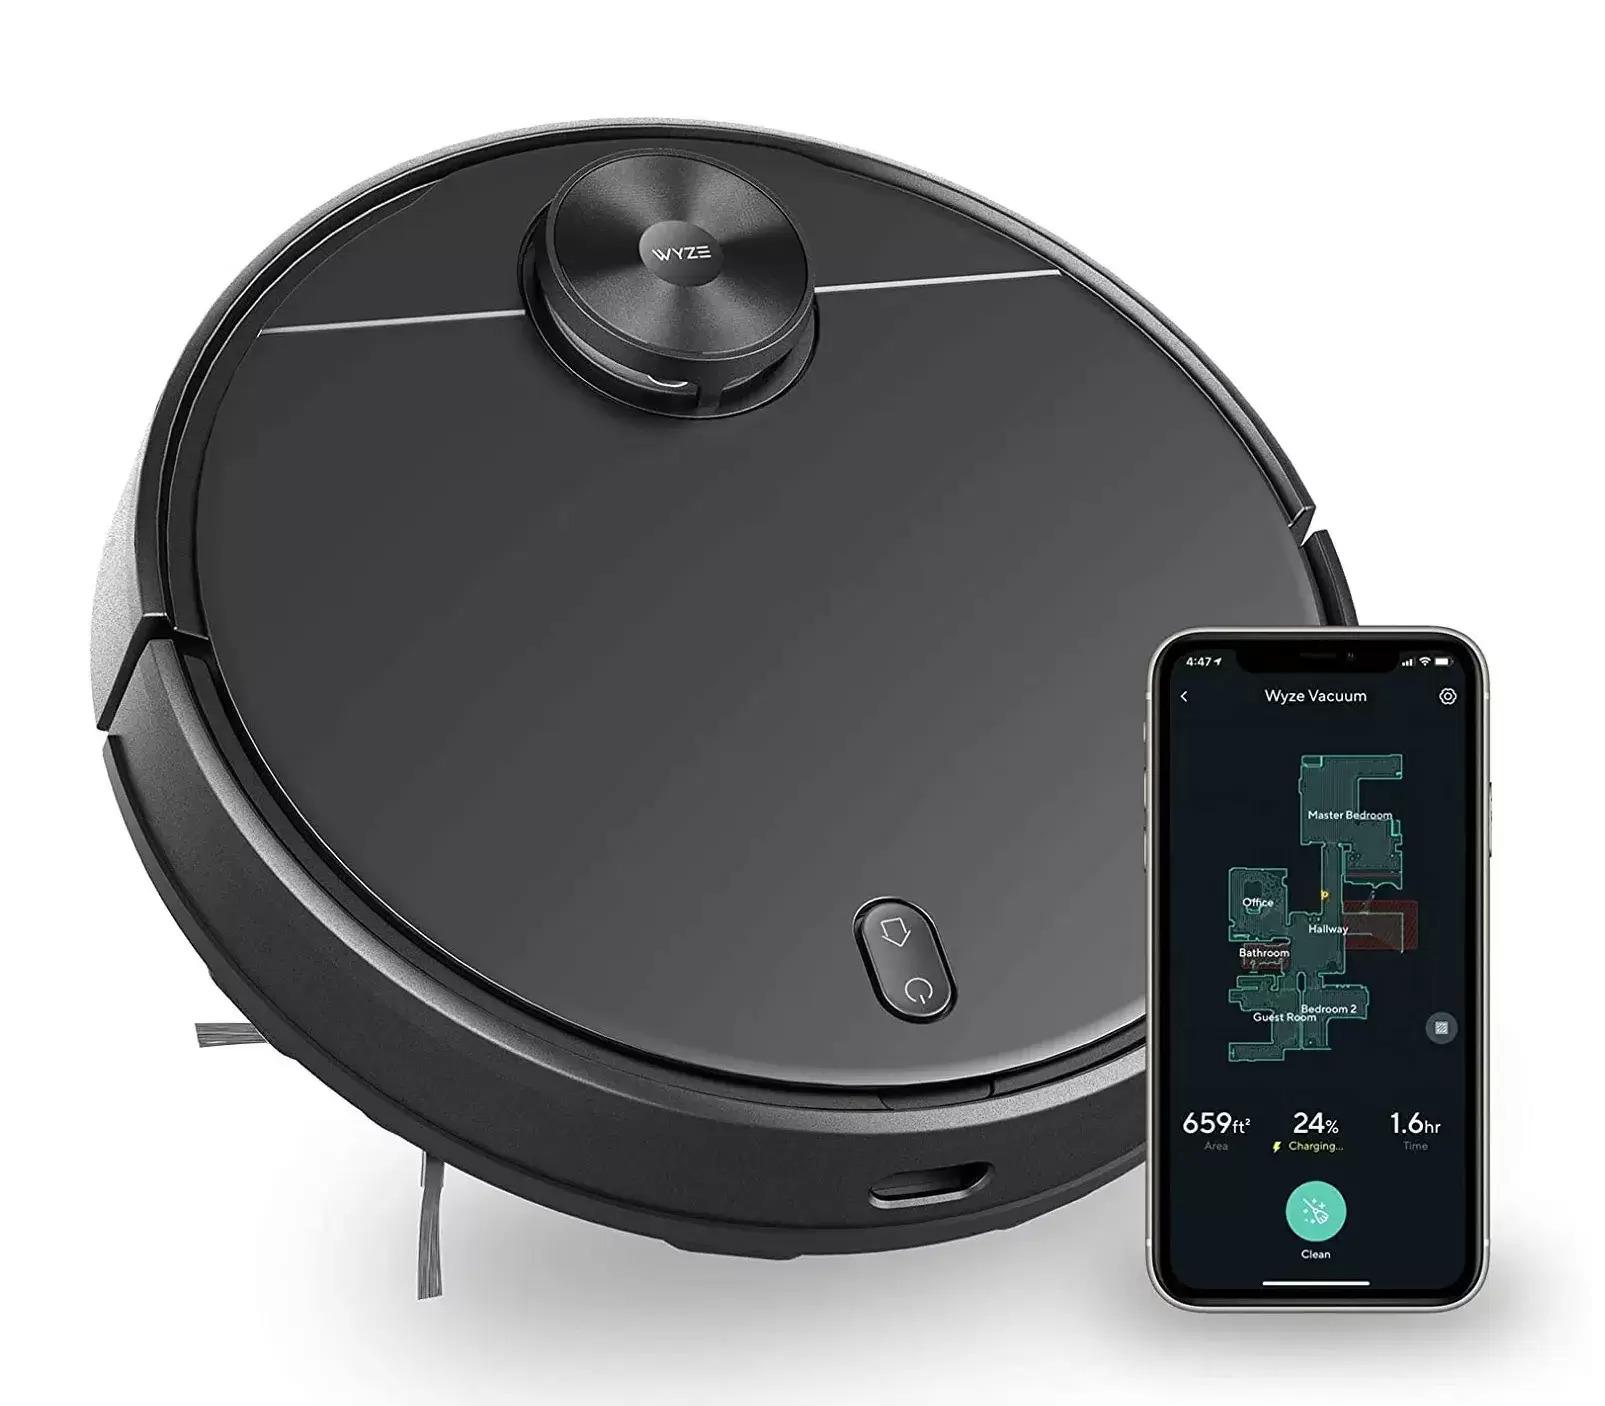 Wyze Robot Vacuum with LIDAR Mapping Technology for $149 Shipped